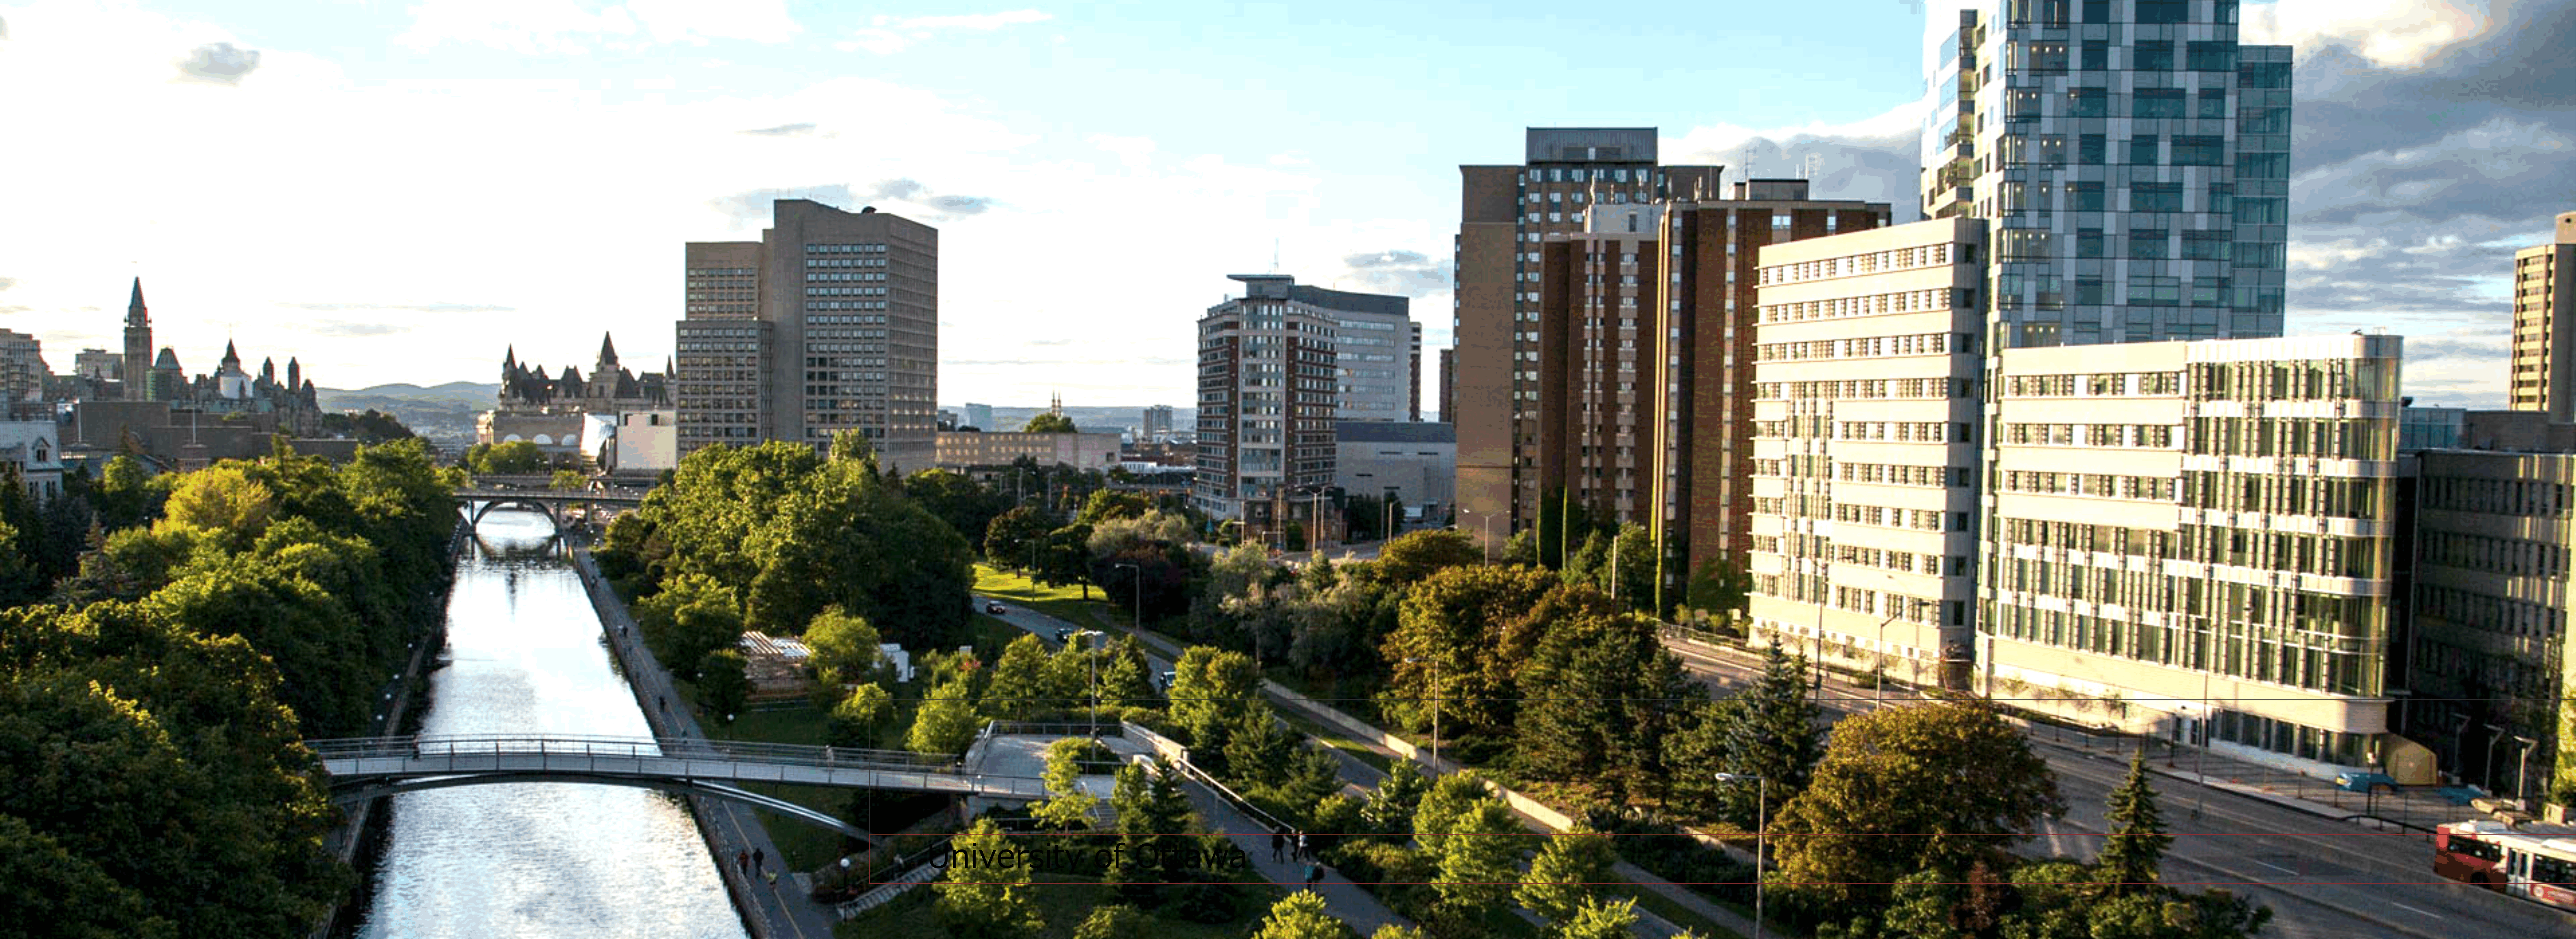 The uOttawa Downtown Campus